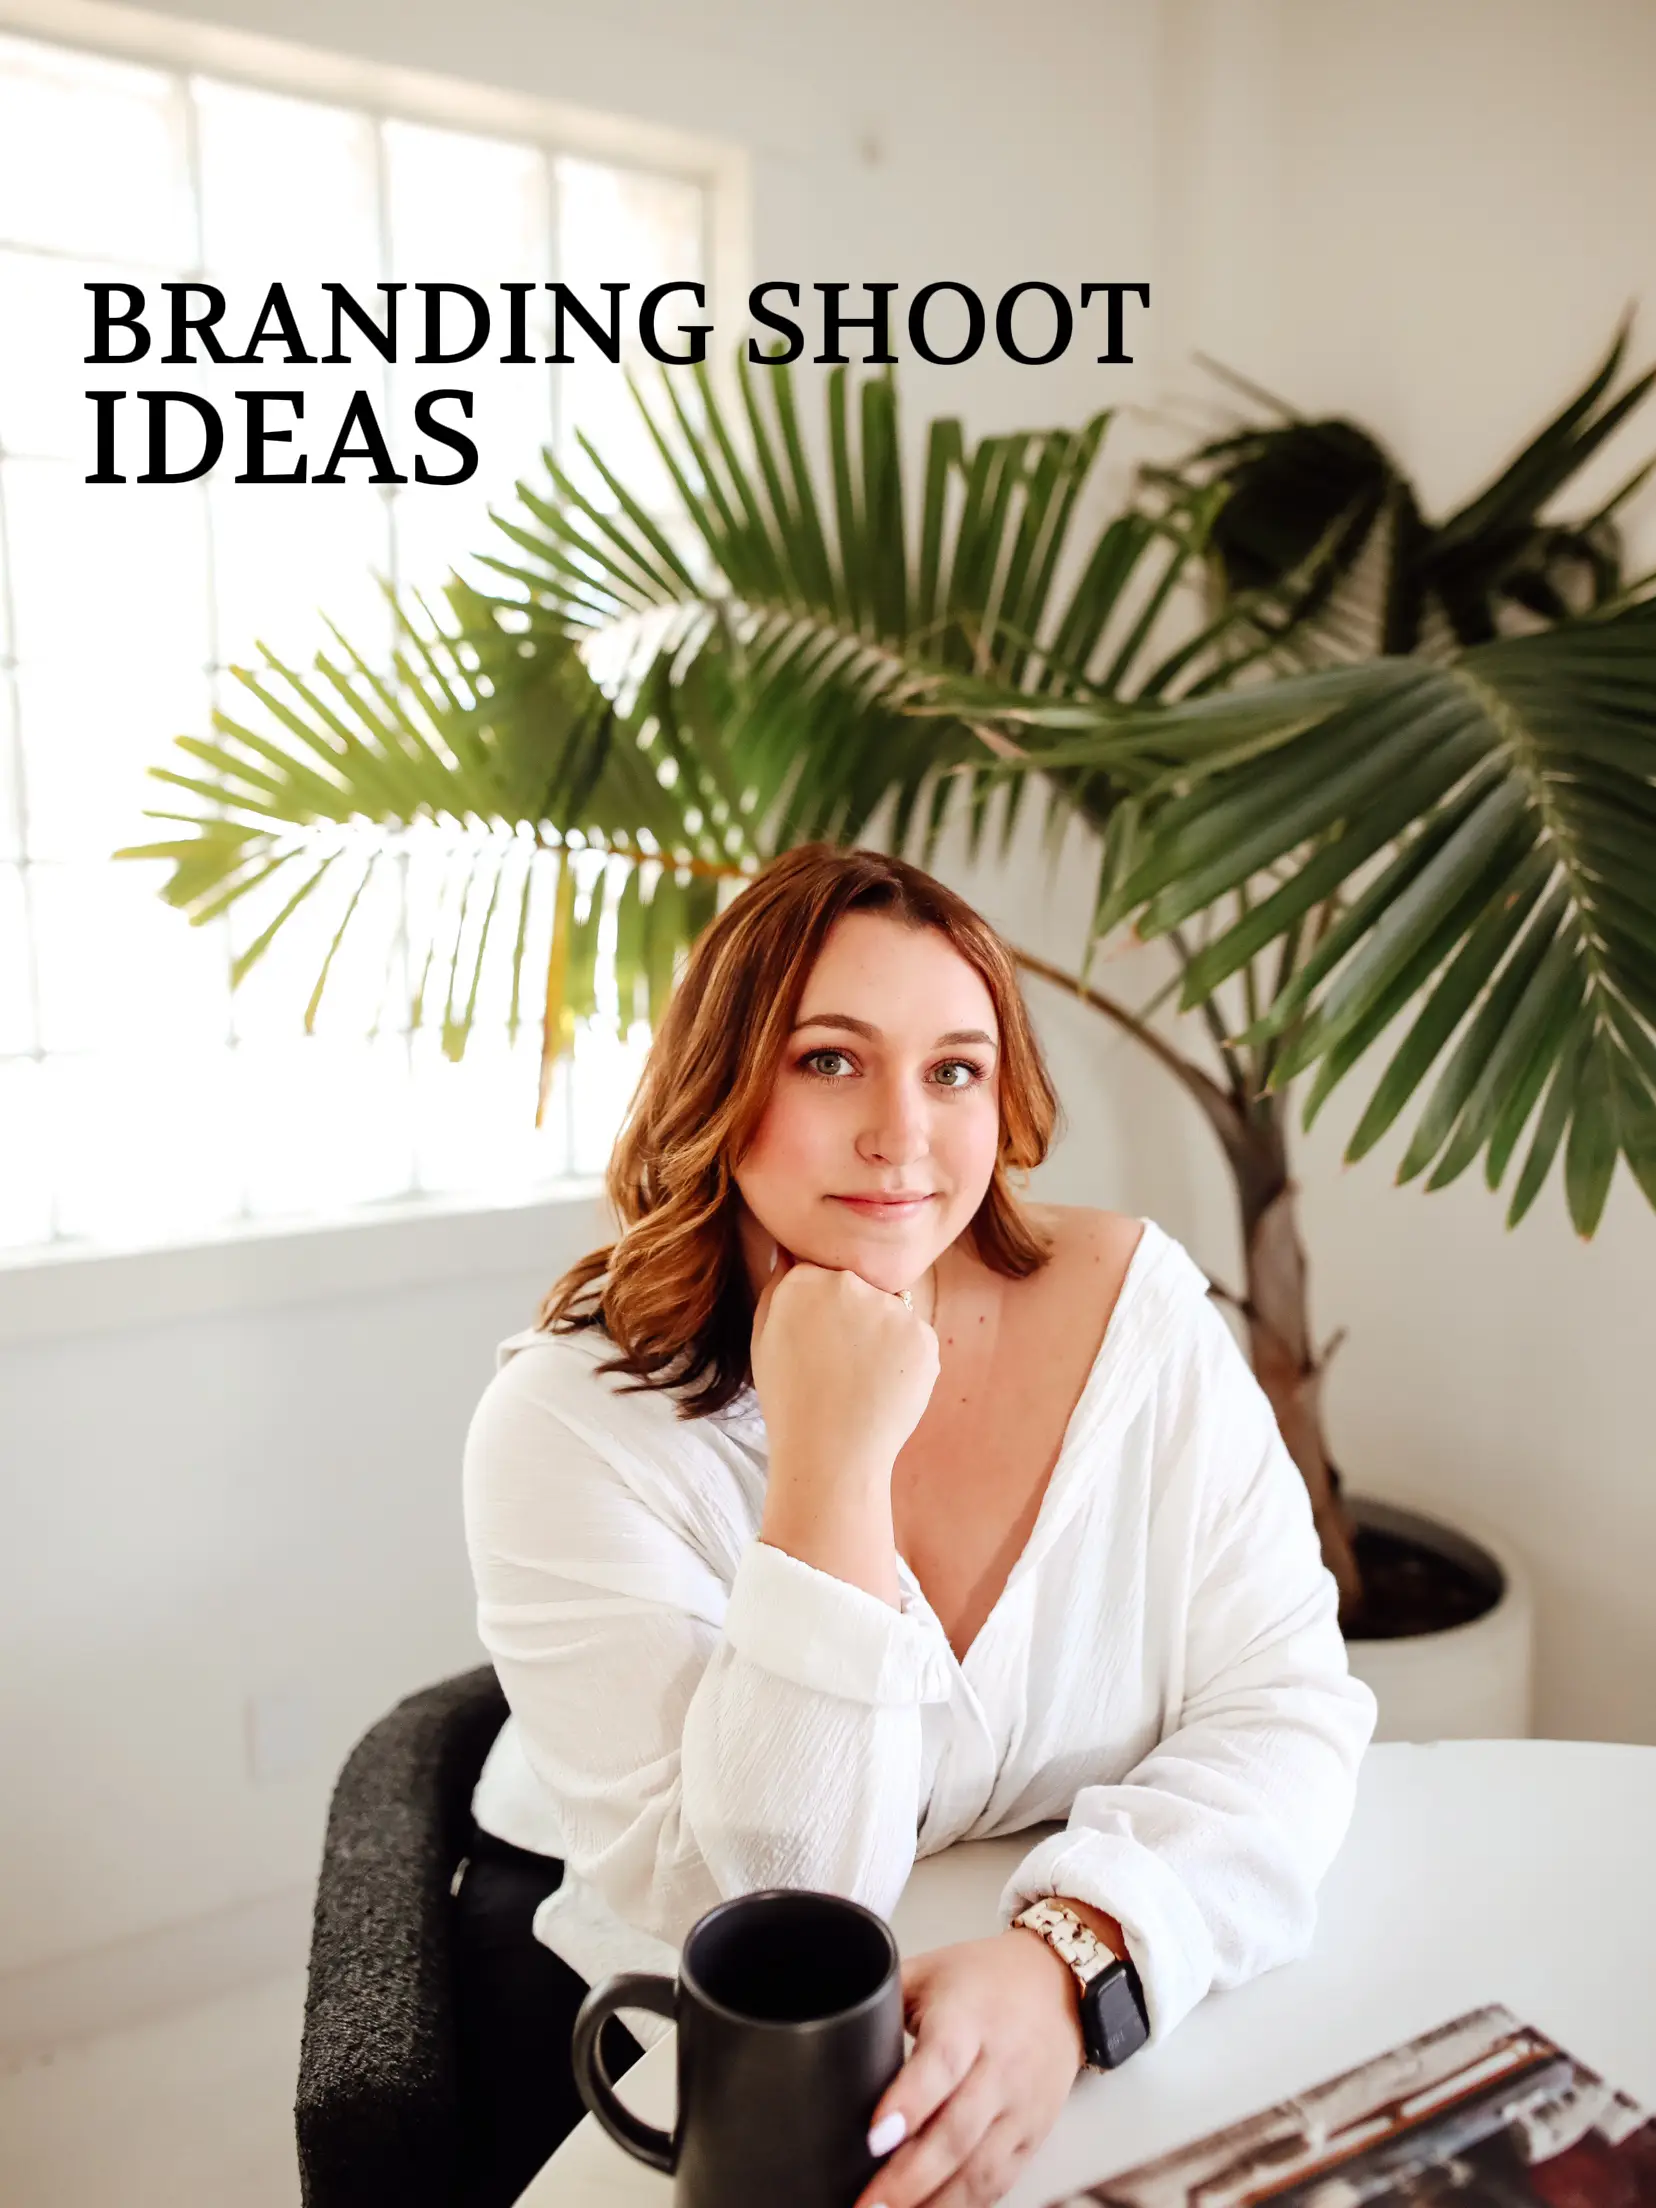 Make your brand as unique as you are. #branding #photoshoot  #losangelesphotographer